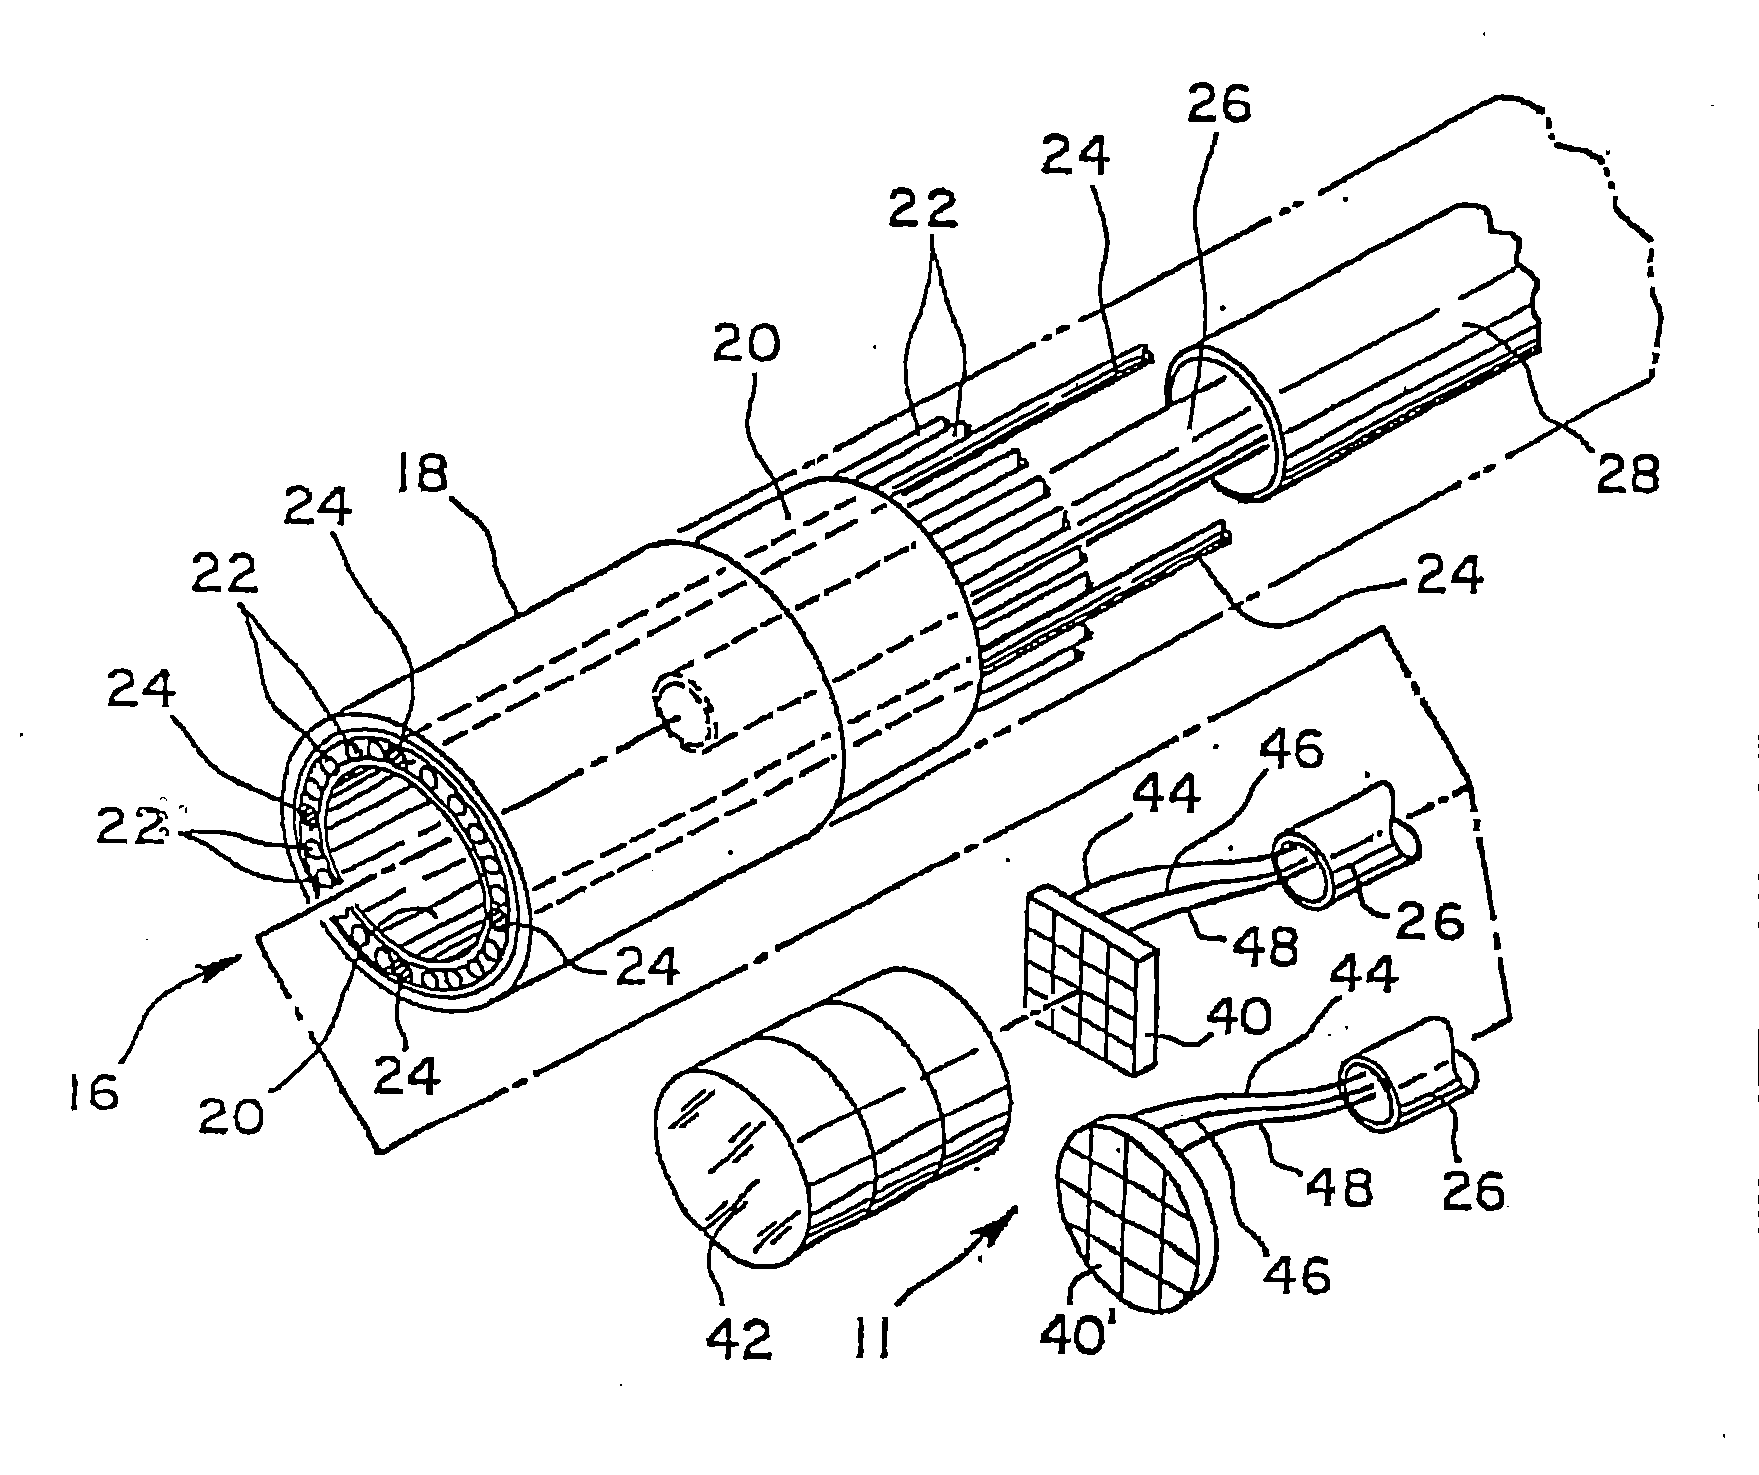 Reduced area imaging device incorporated  within wireless endoscopic devices